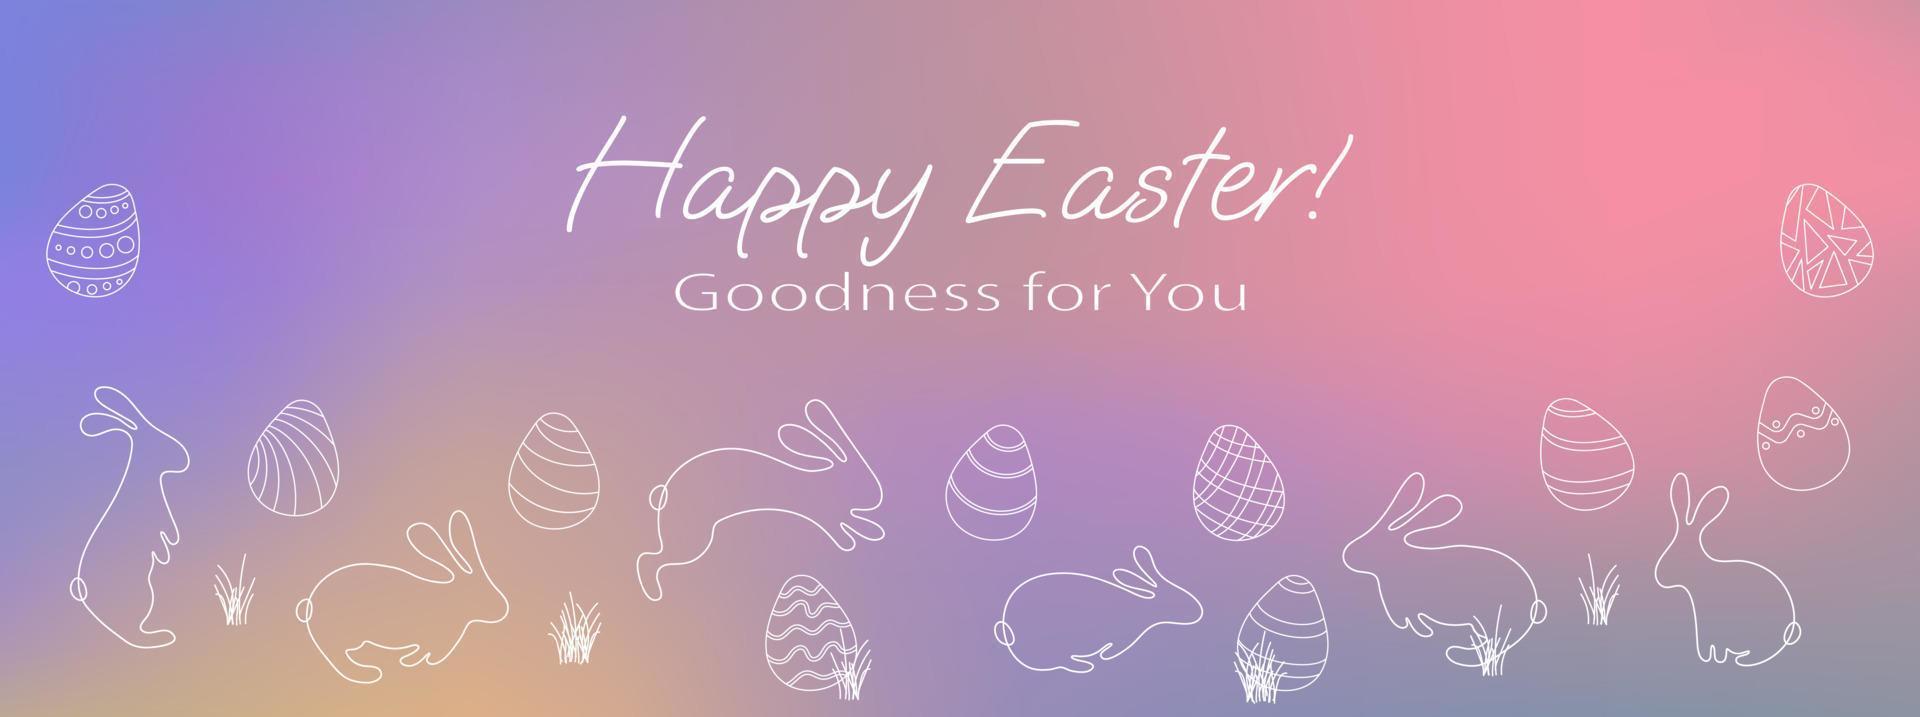 Happy Easter vector background with blurred gradient